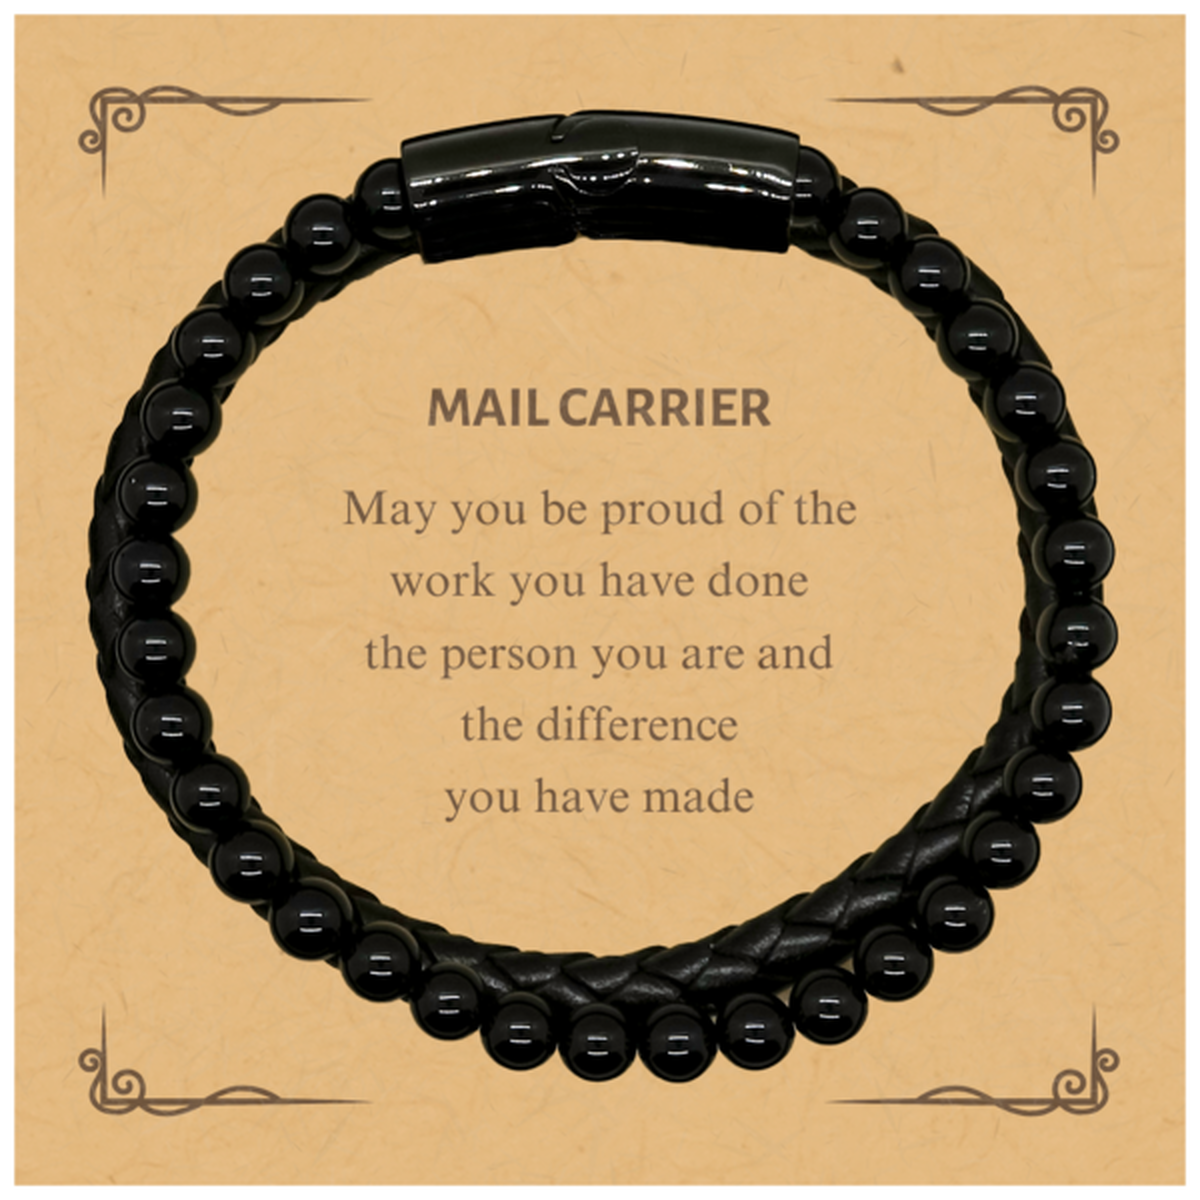 Mail Carrier May you be proud of the work you have done, Retirement Mail Carrier Stone Leather Bracelets for Colleague Appreciation Gifts Amazing for Mail Carrier